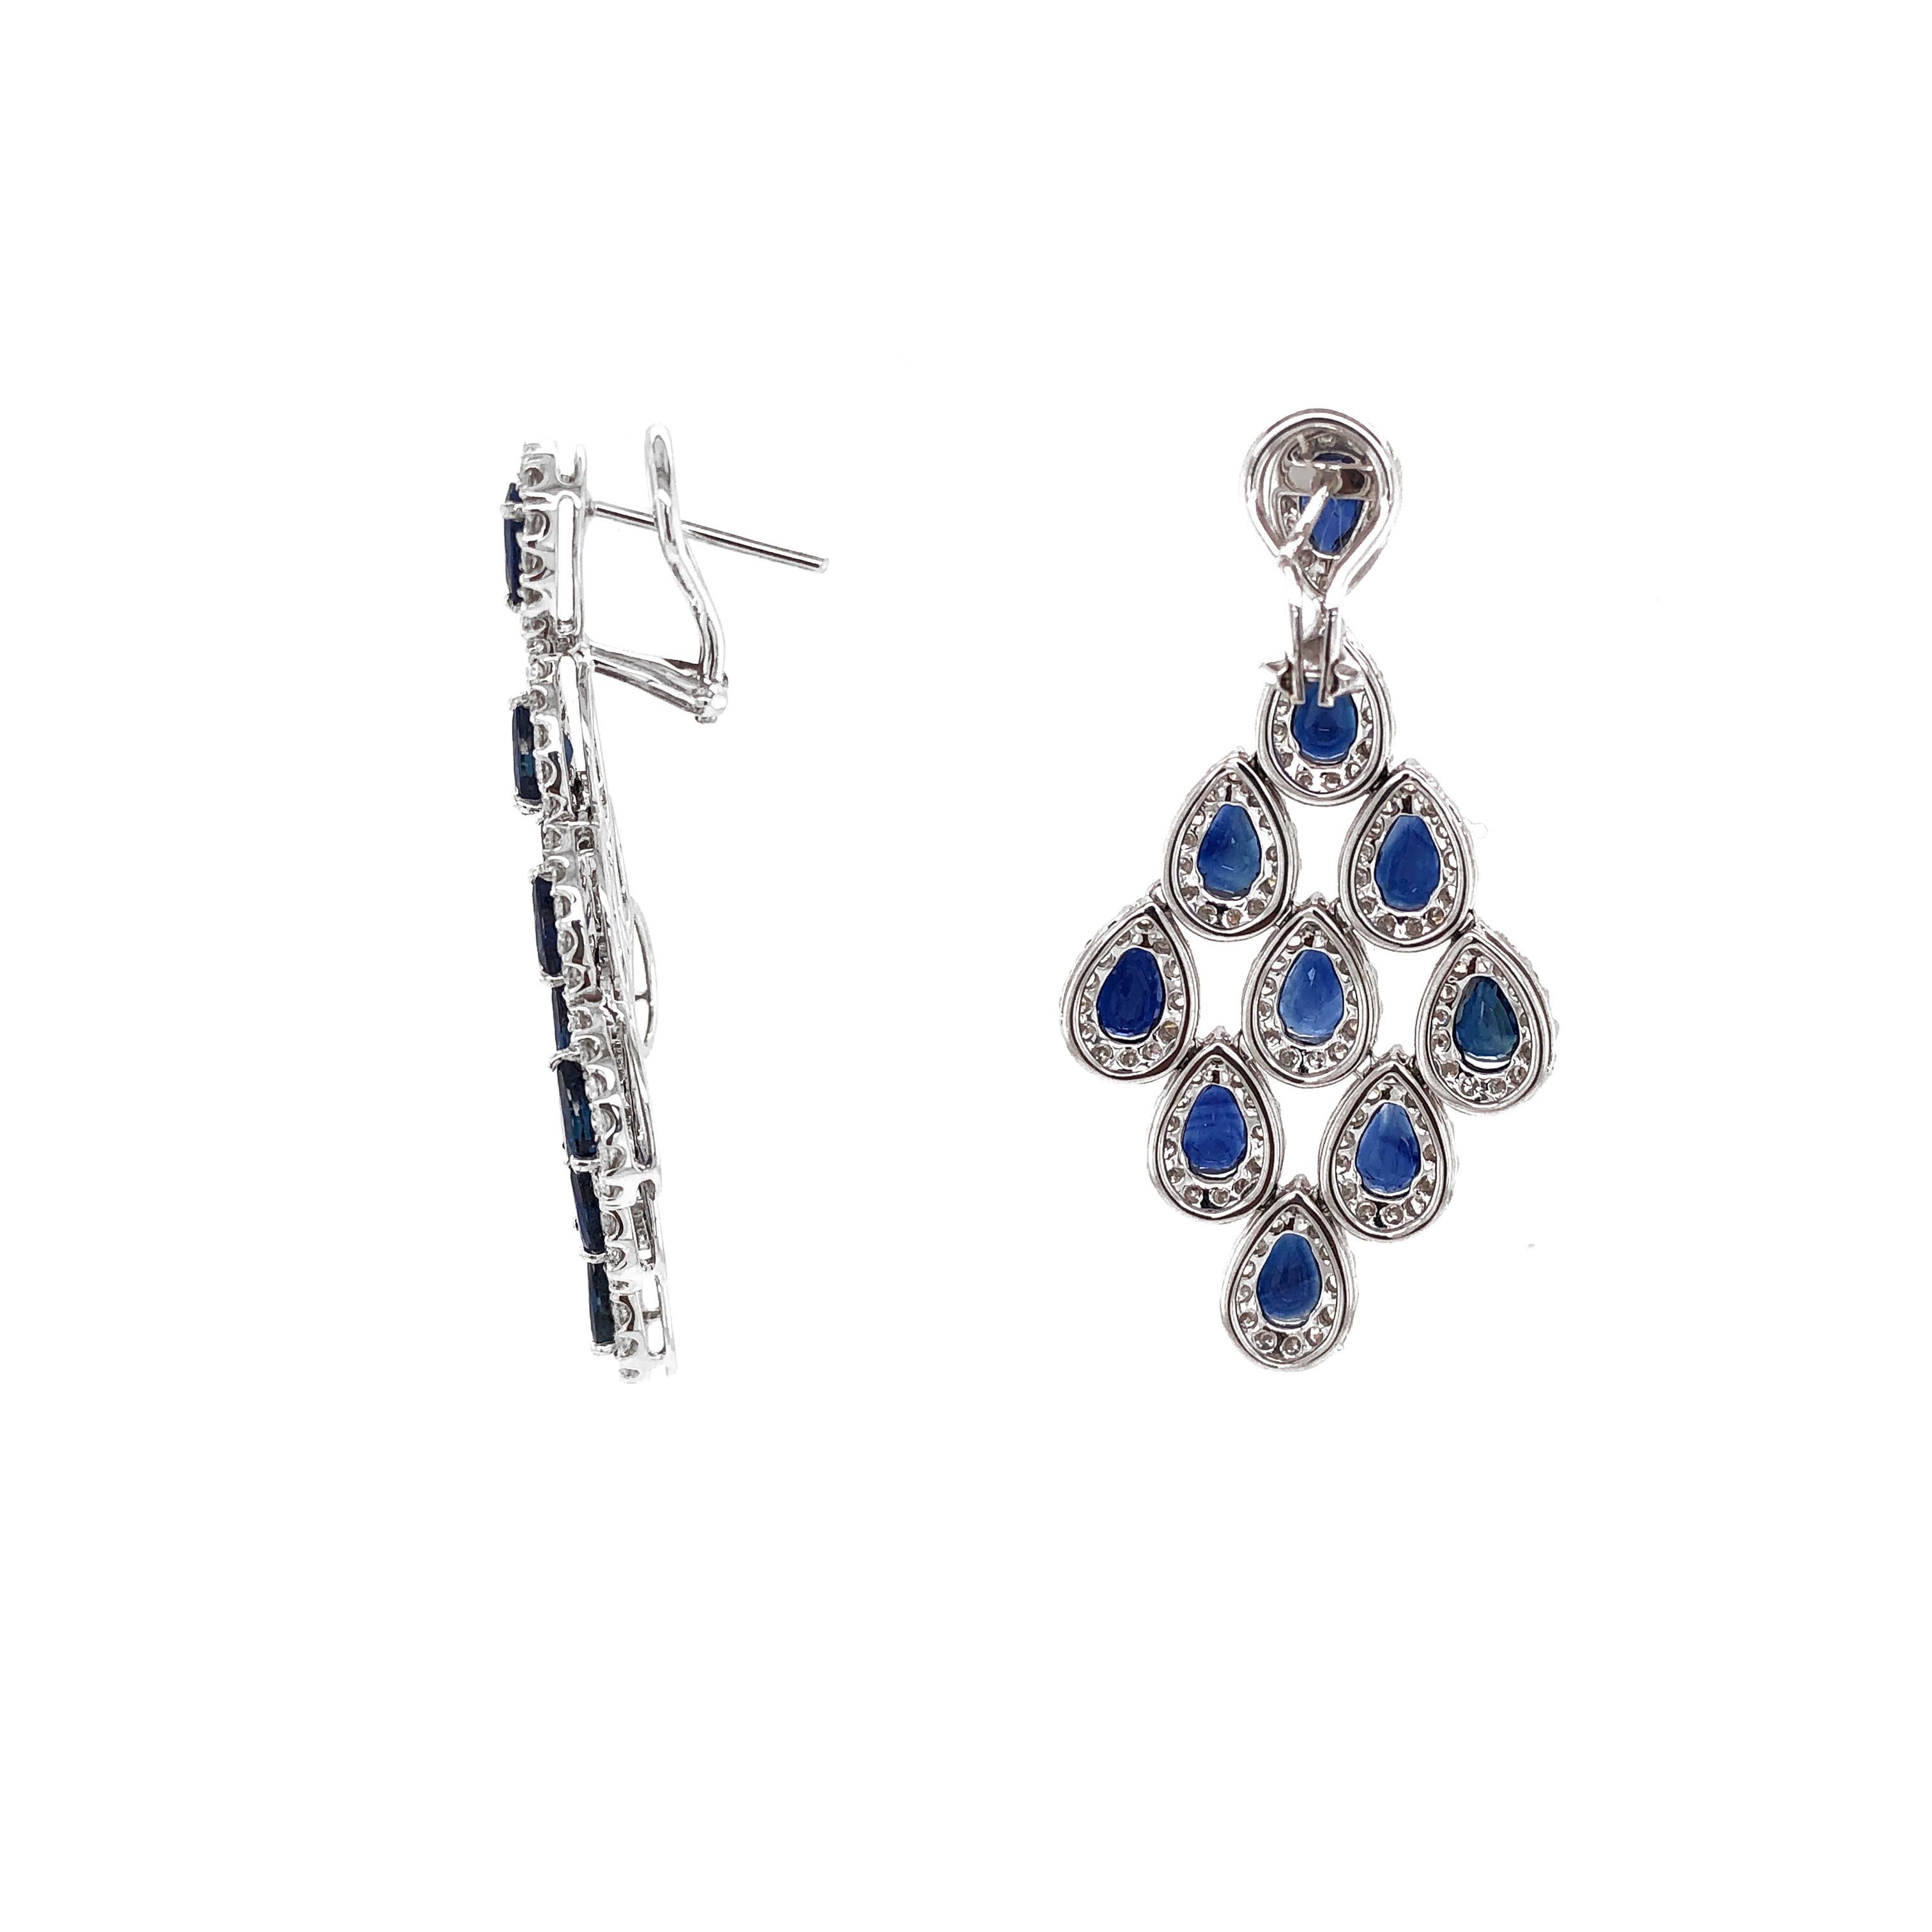 Ceylon Sapphire 10.44 Carat Diamond Chandelier 18 Karat Gold Earrings In New Condition For Sale In New York, NY